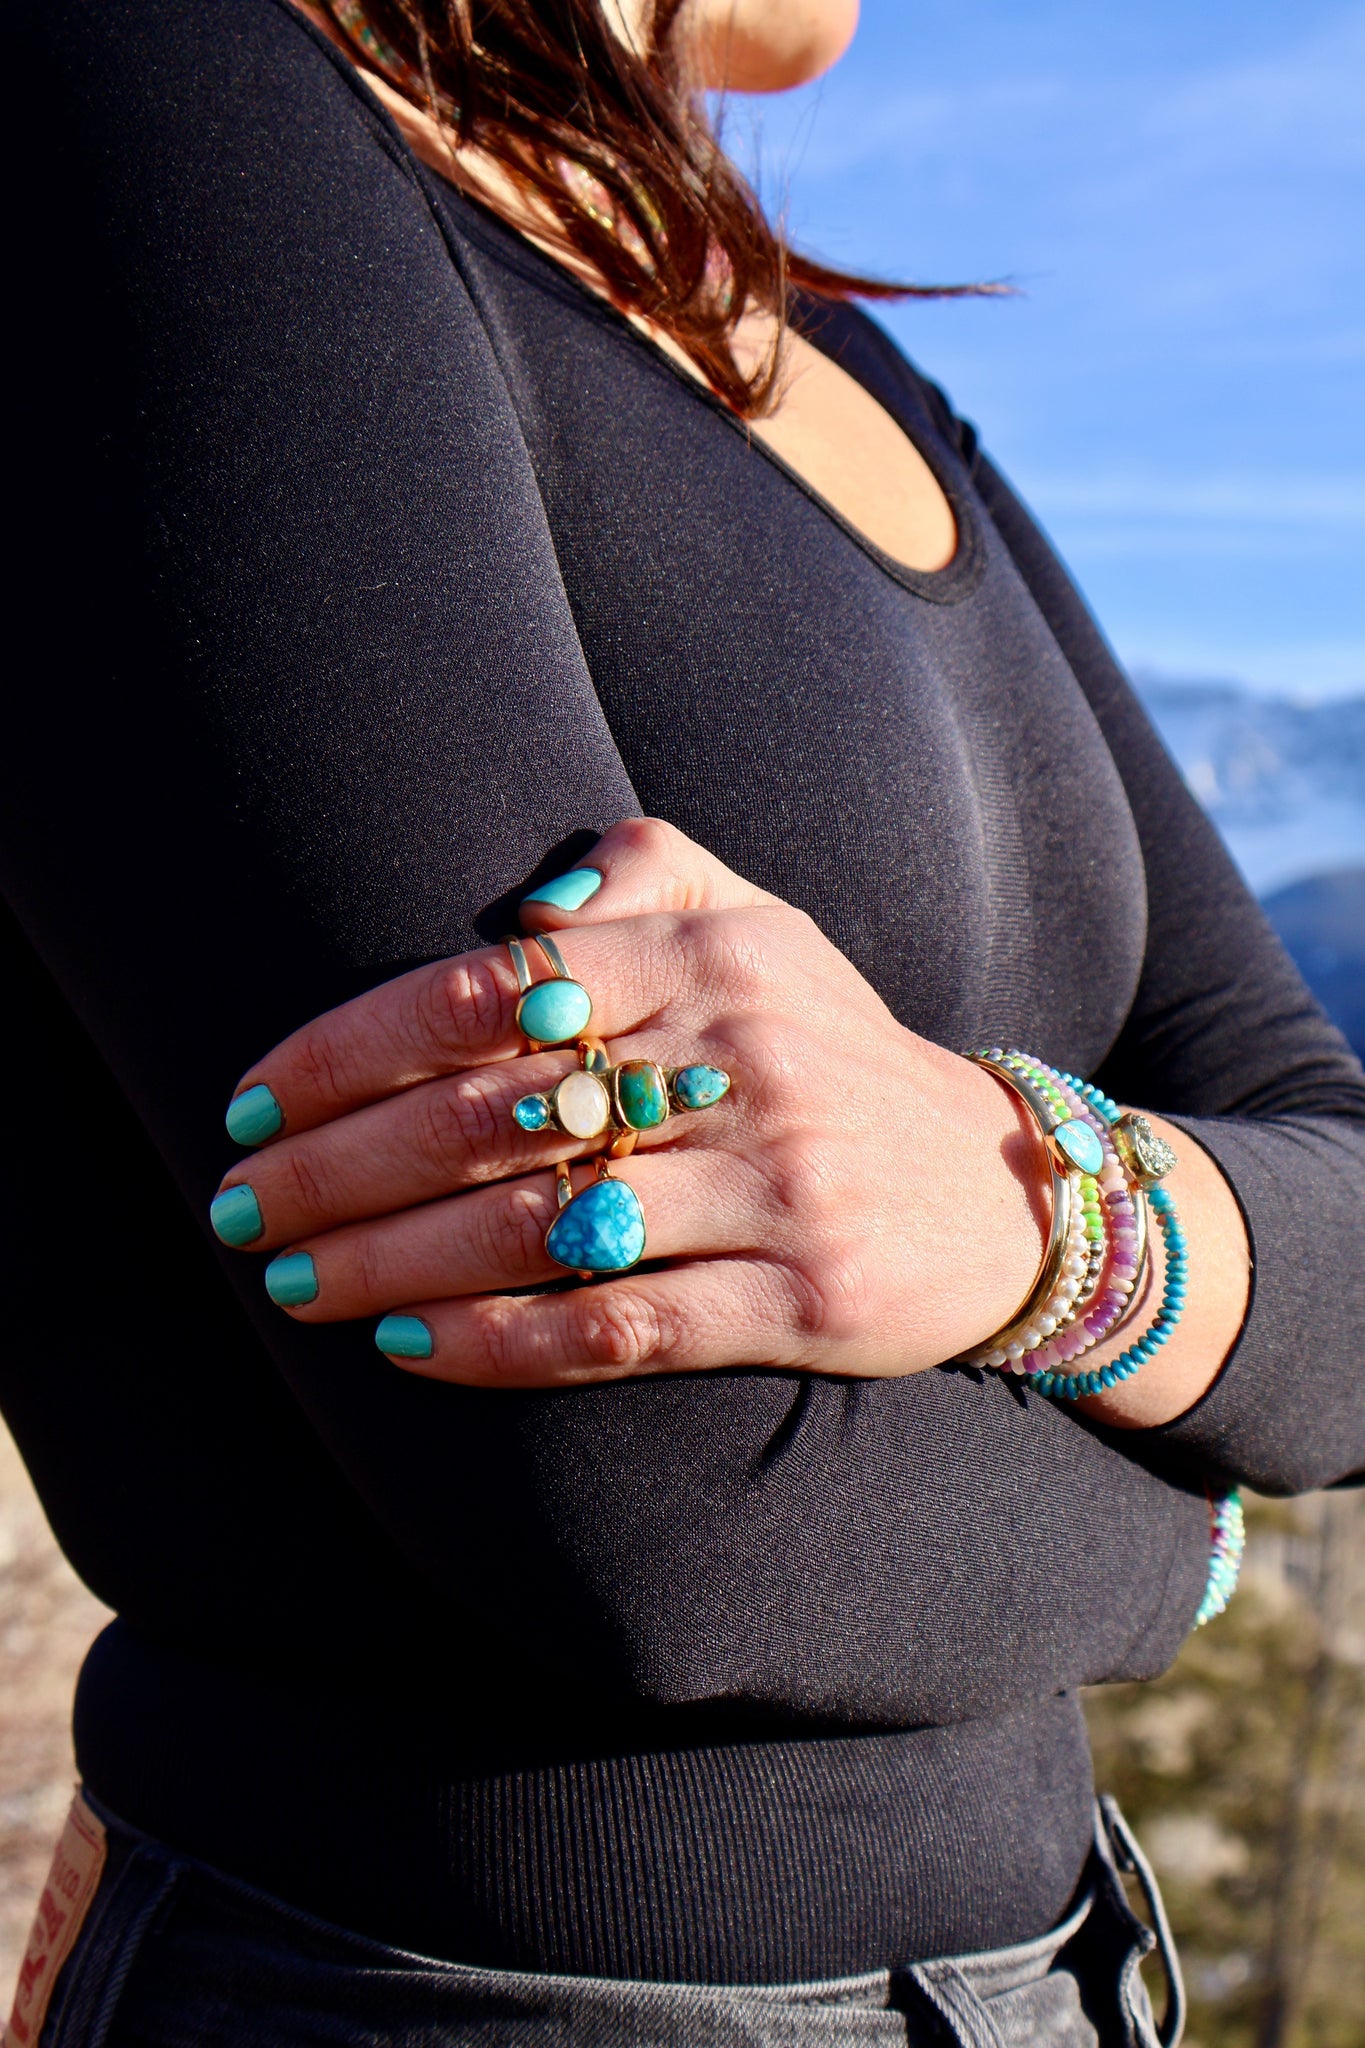 Winter Thaw Drip Cuff in Gold Alchemia & Turquoise Adjustable WT33